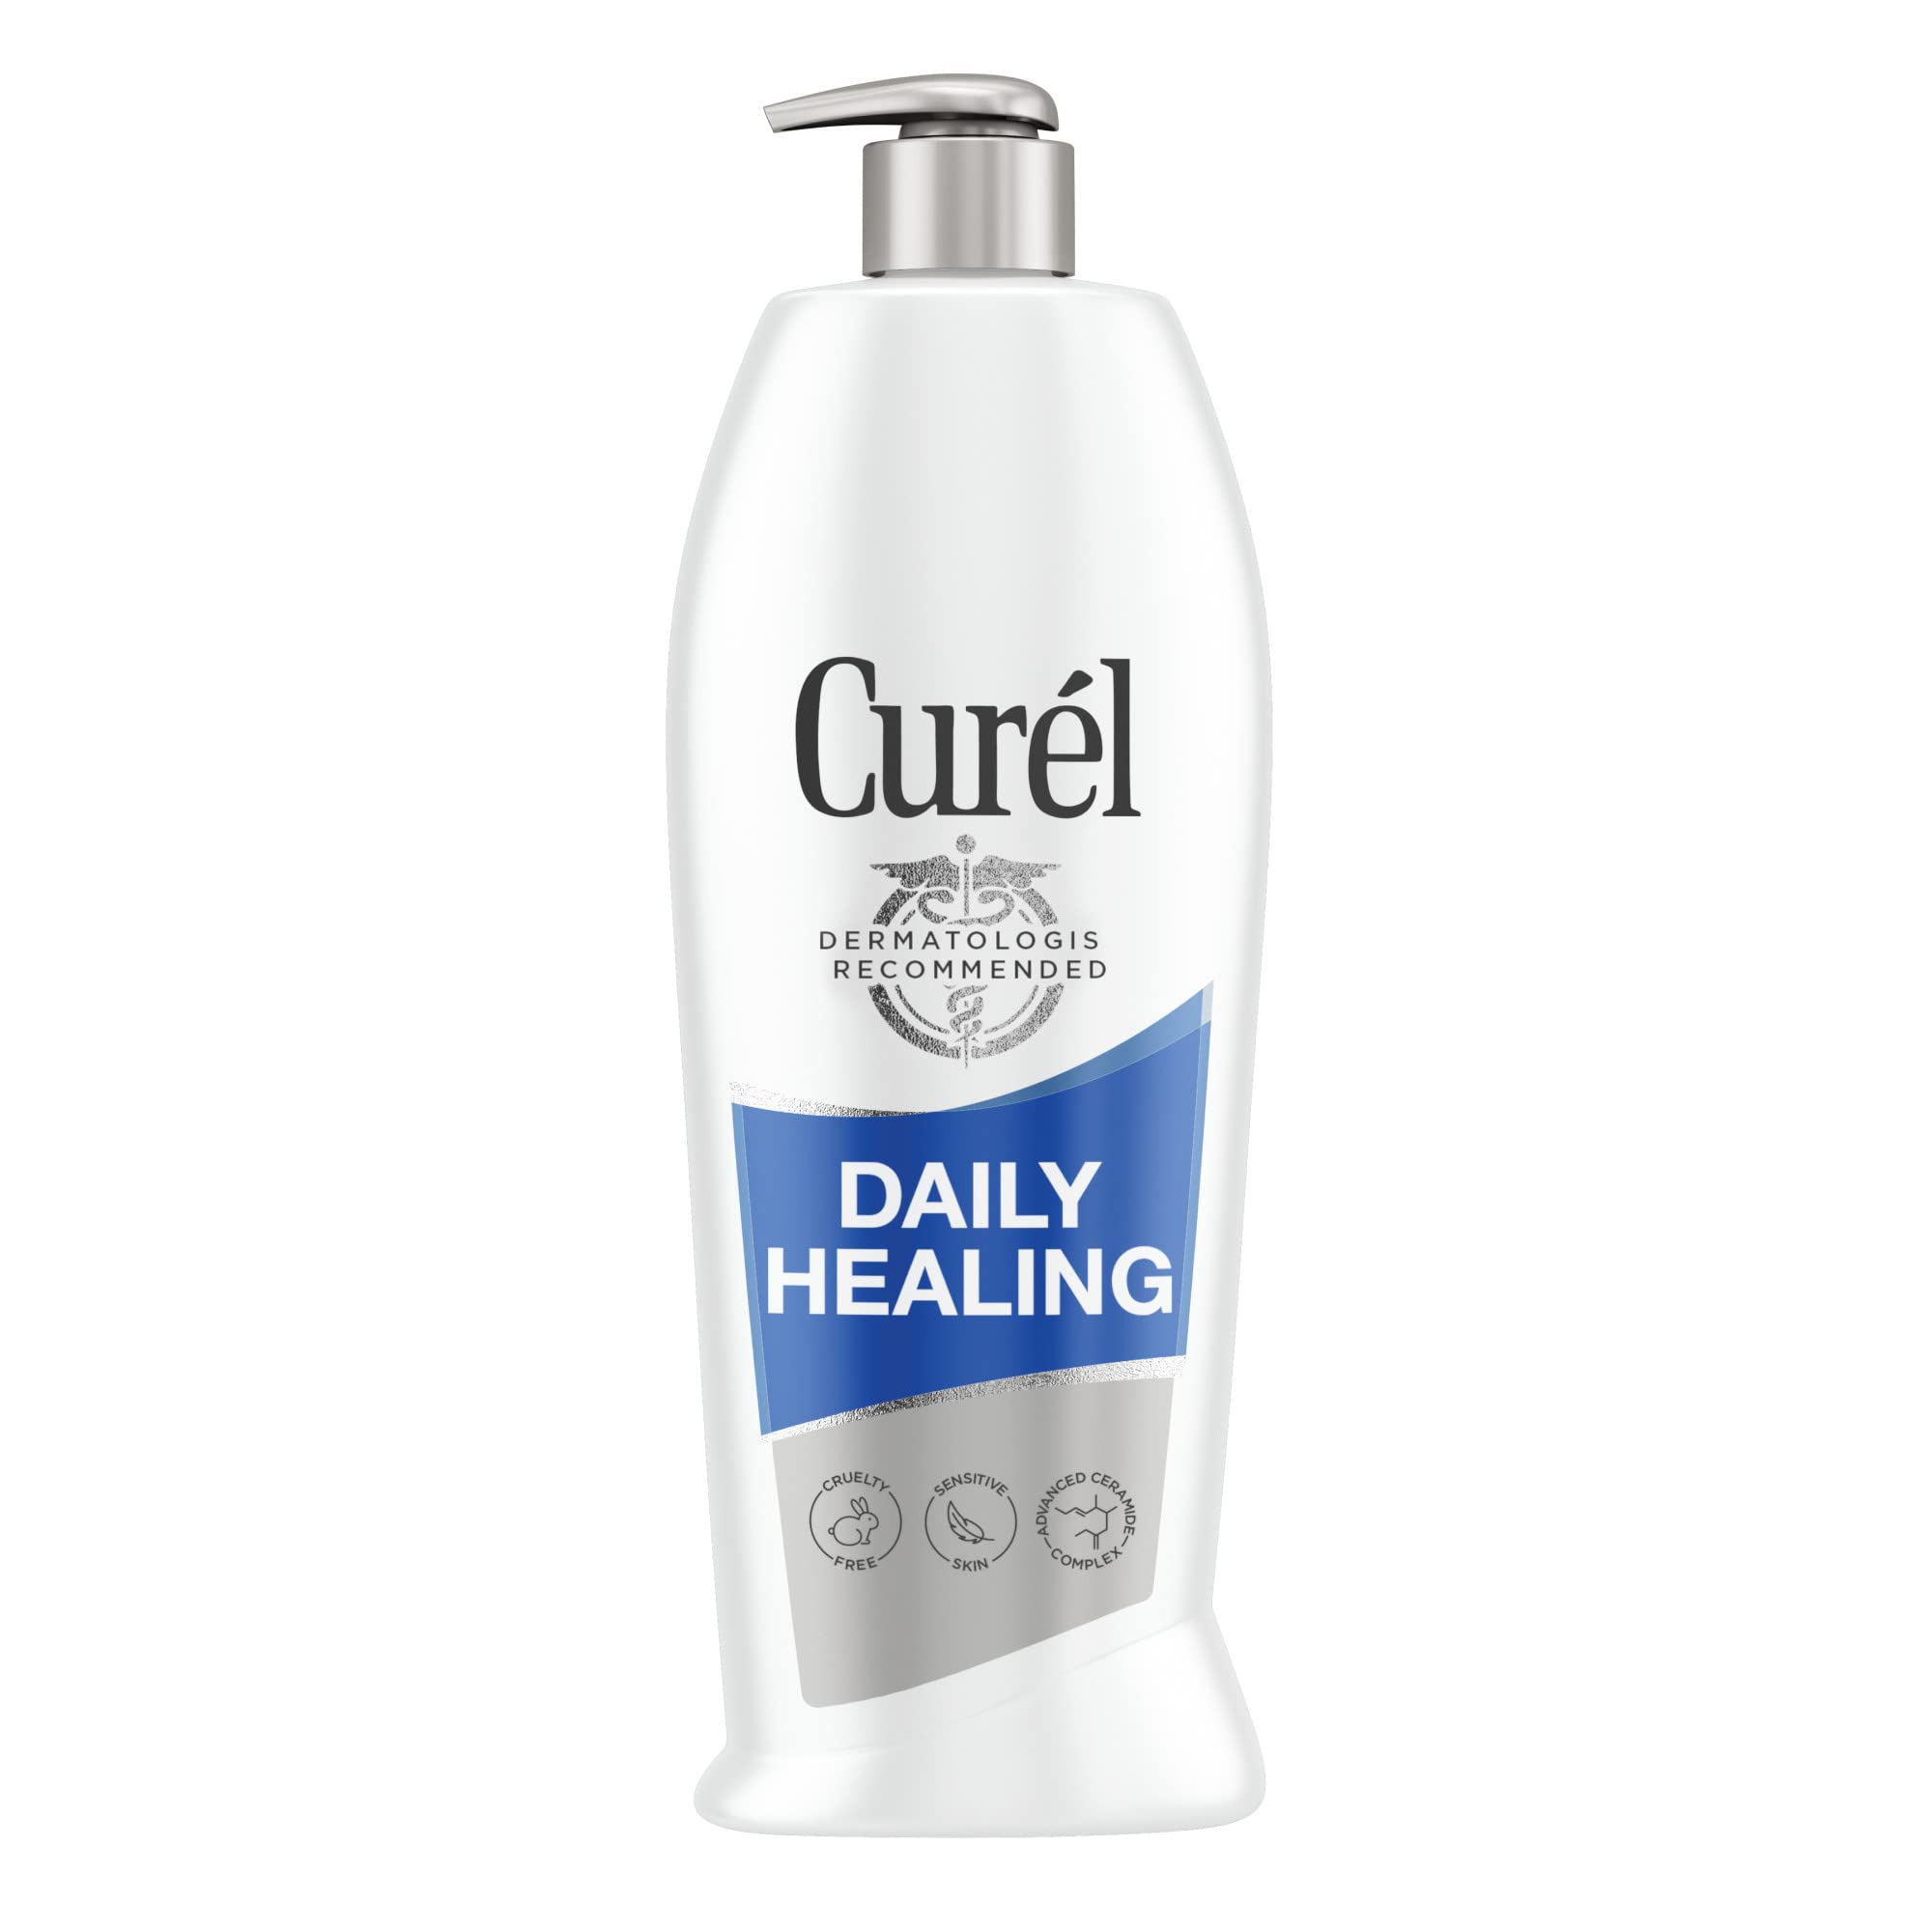 Curél Daily Healing Body Lotion for Dry Skin, Hand and Body Moisturizer Repairs Dry Skin and Retains Moisture, with Advanced Ceramides Complex, 20 Ounce